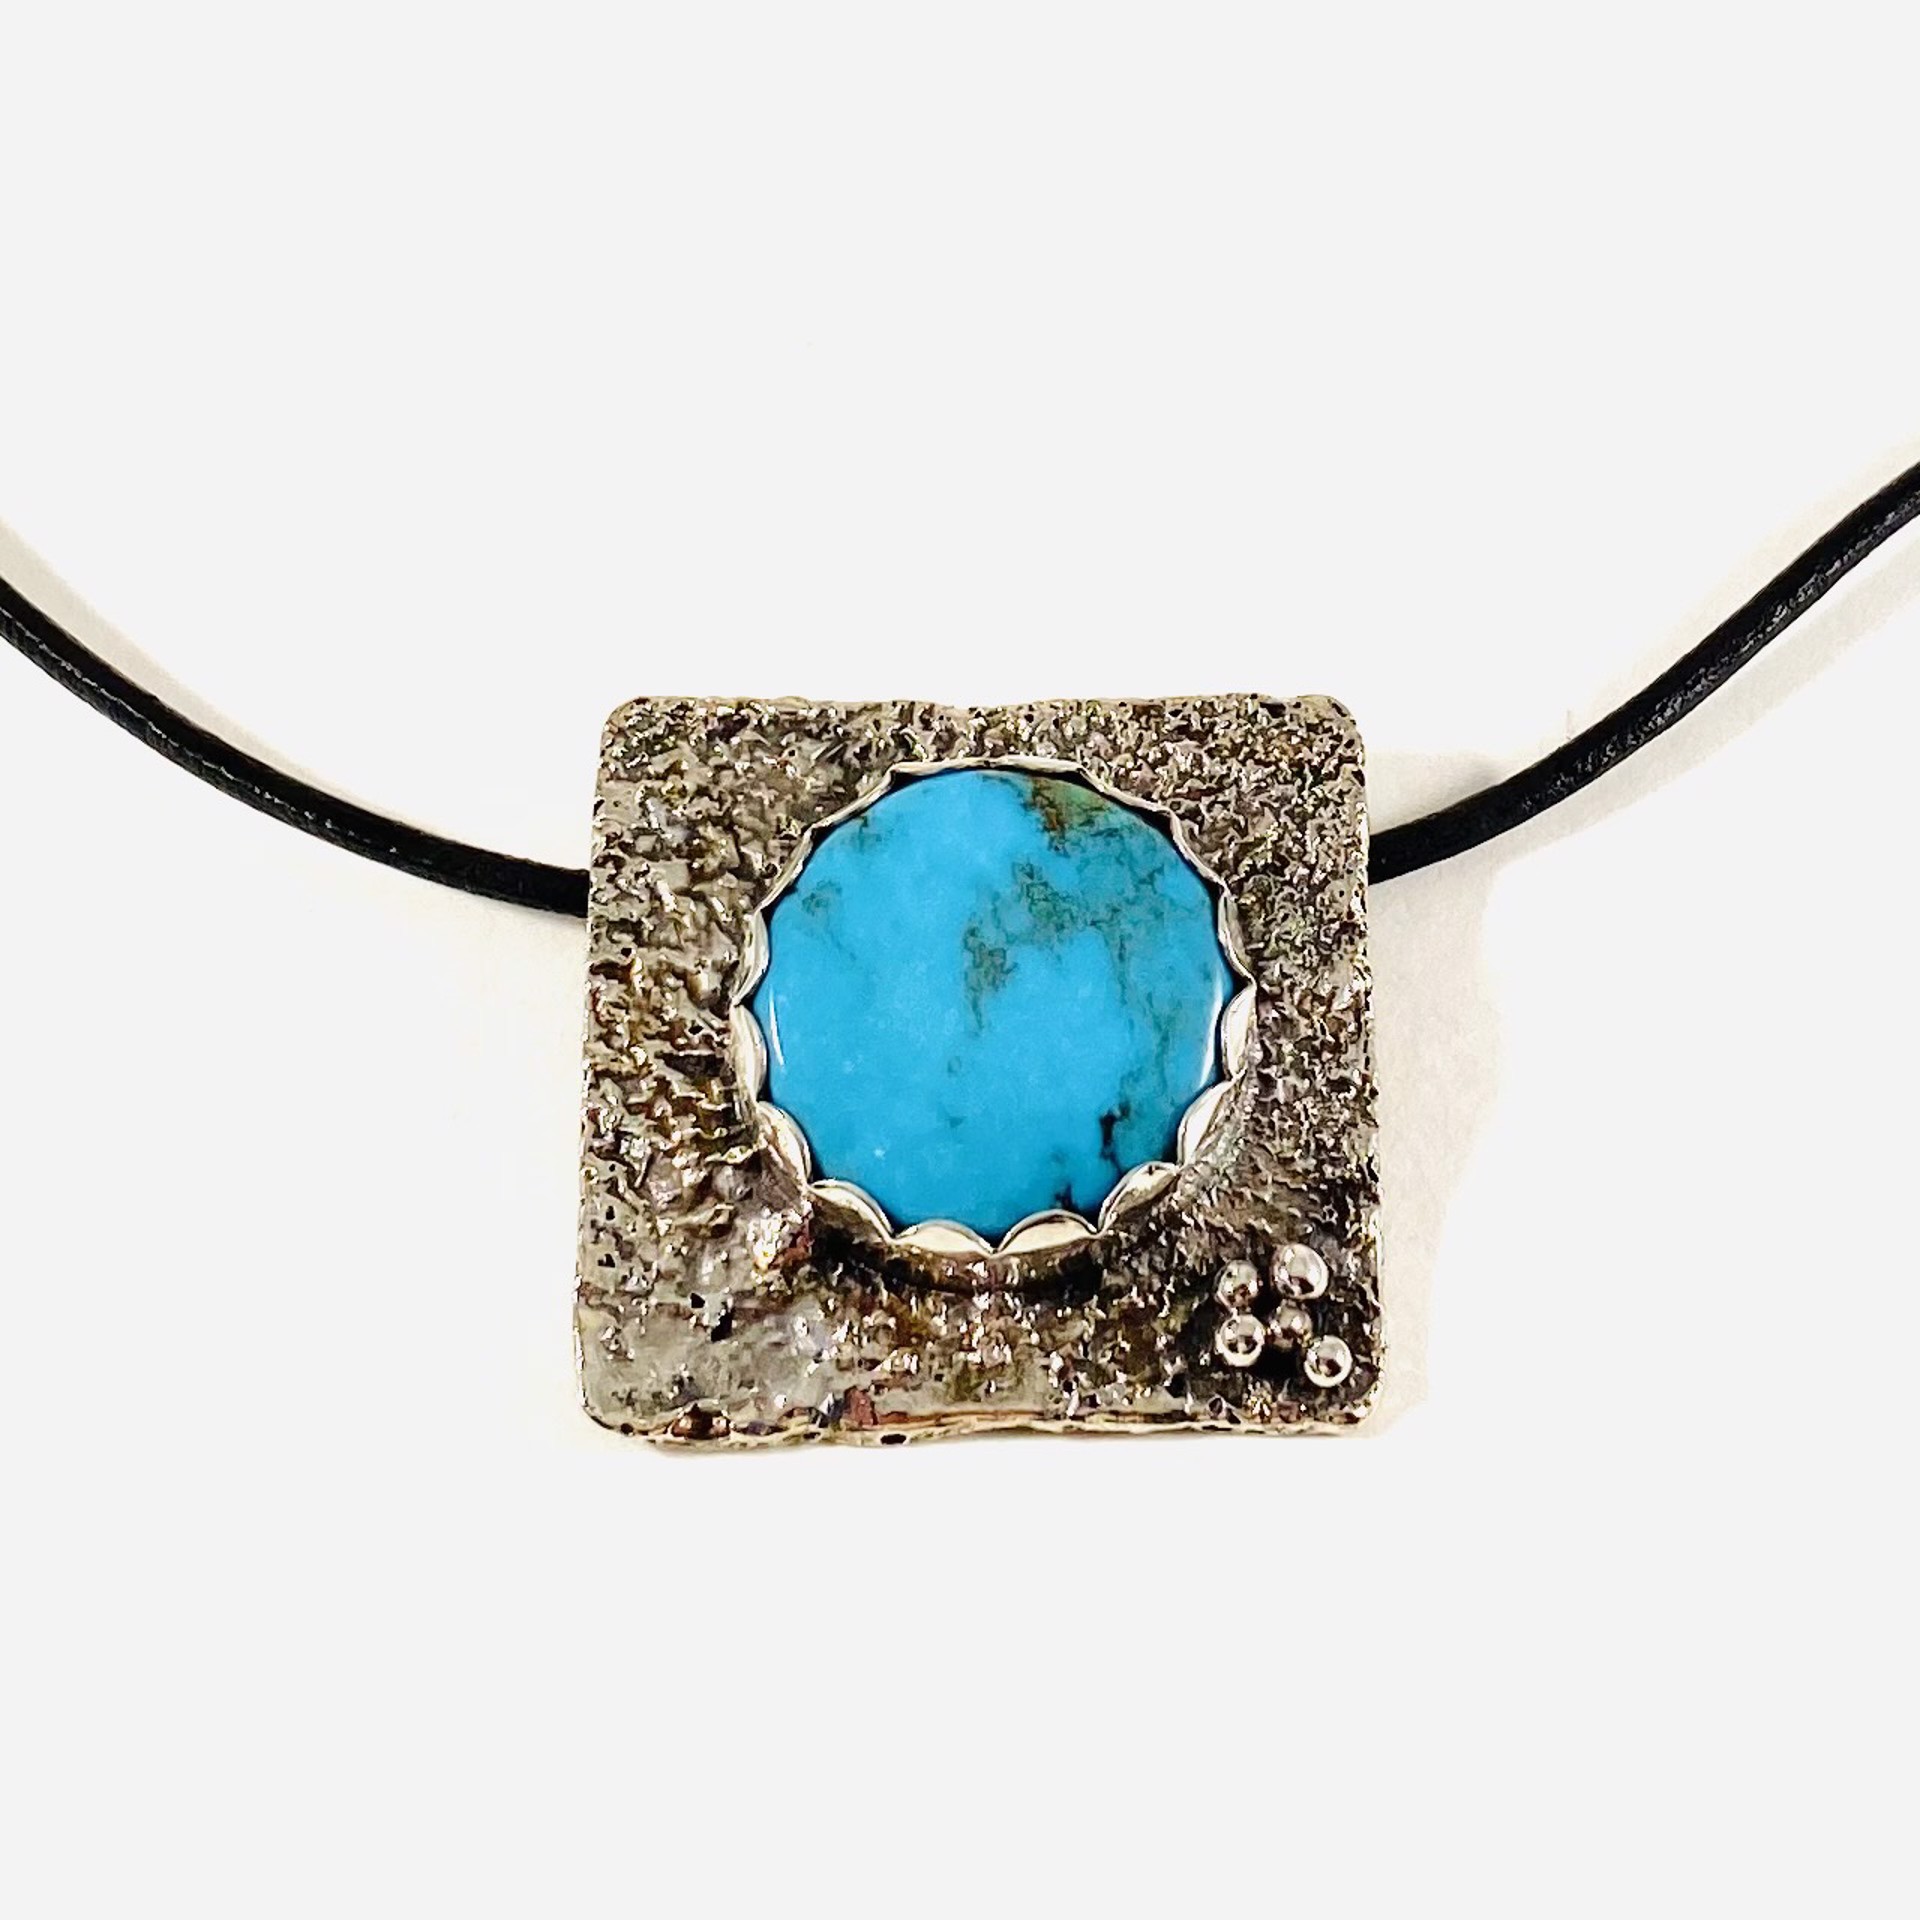 Kingman Turquoise Reticulated Silver Pendant on Leather Cord Necklace AB21-29 by Anne Bivens